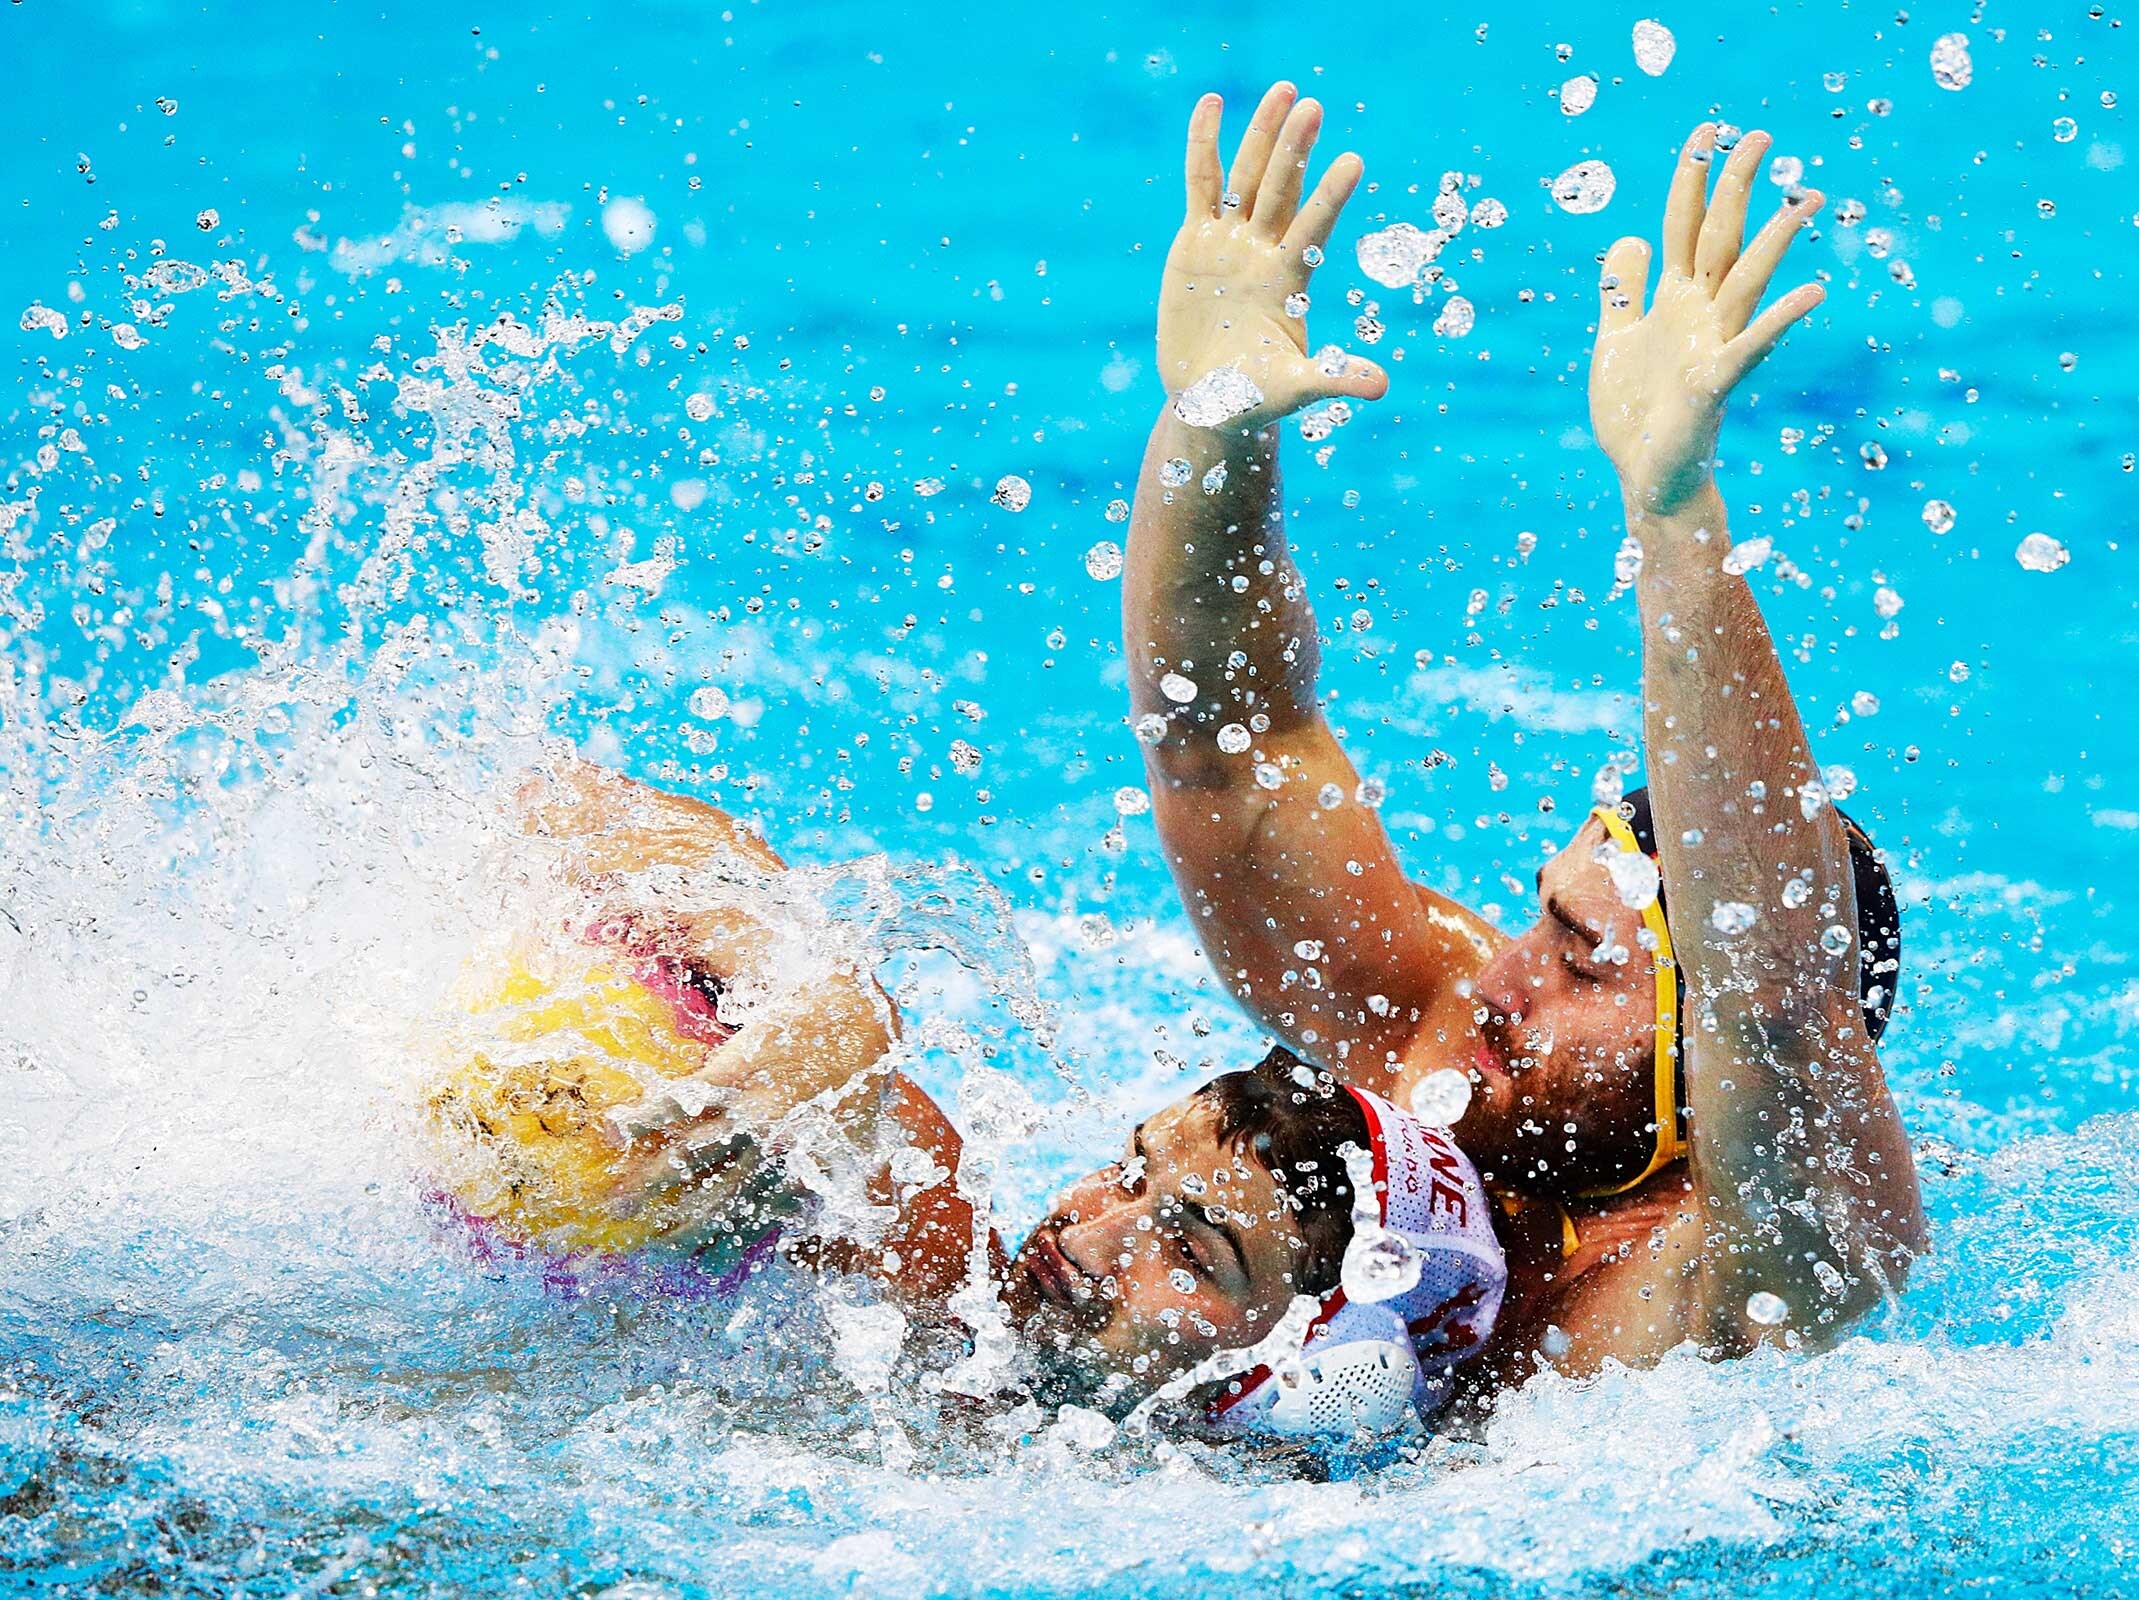 Men's Waterpolo - Preliminary Round - Group B